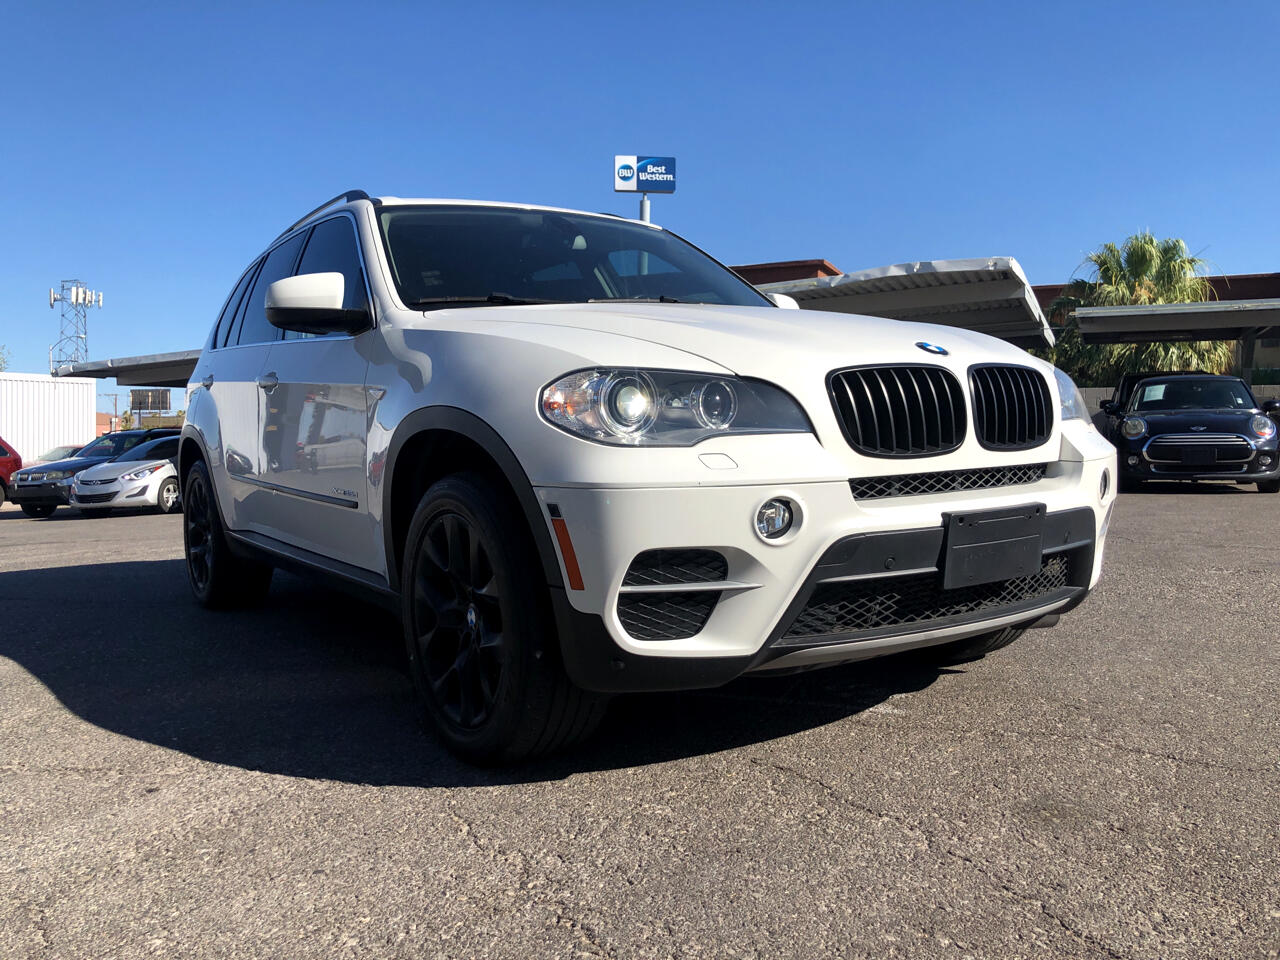 Used 2013 BMW X5 xDrive35d for Sale in Las Vegas NV 89119 LV Cars Auto Sales - Airport